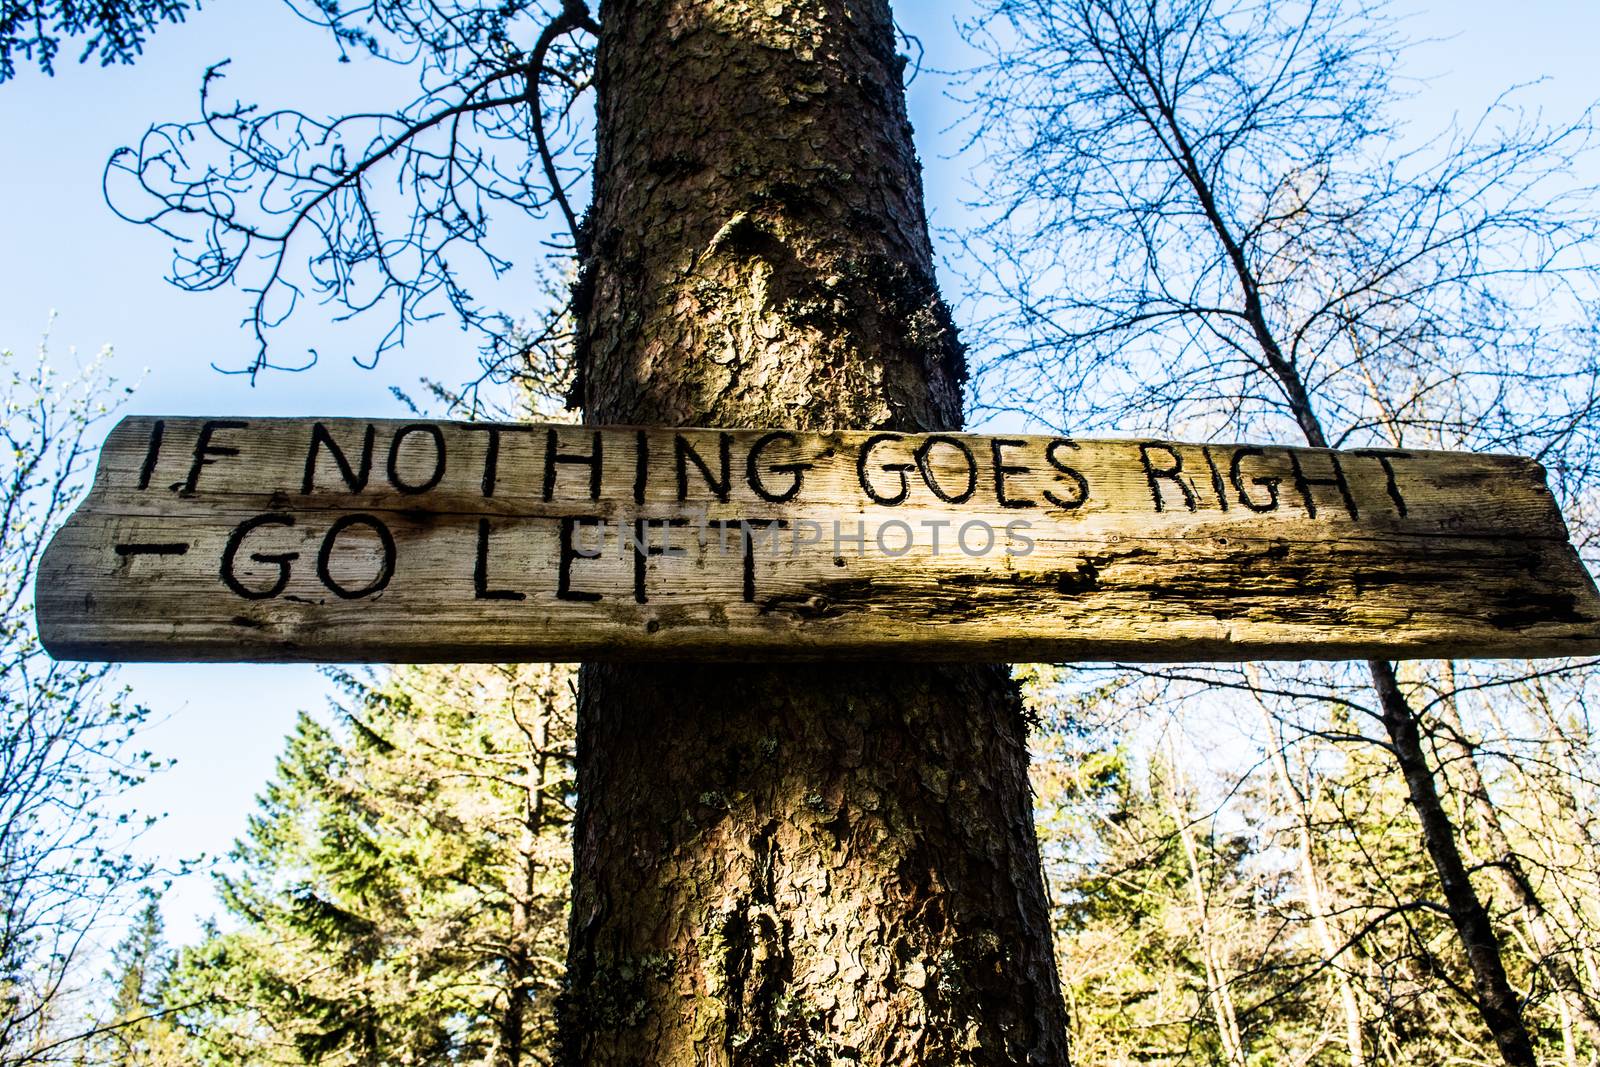 If nothing goes right, then go left wooden sign in the forest attached to a tree. by kb79